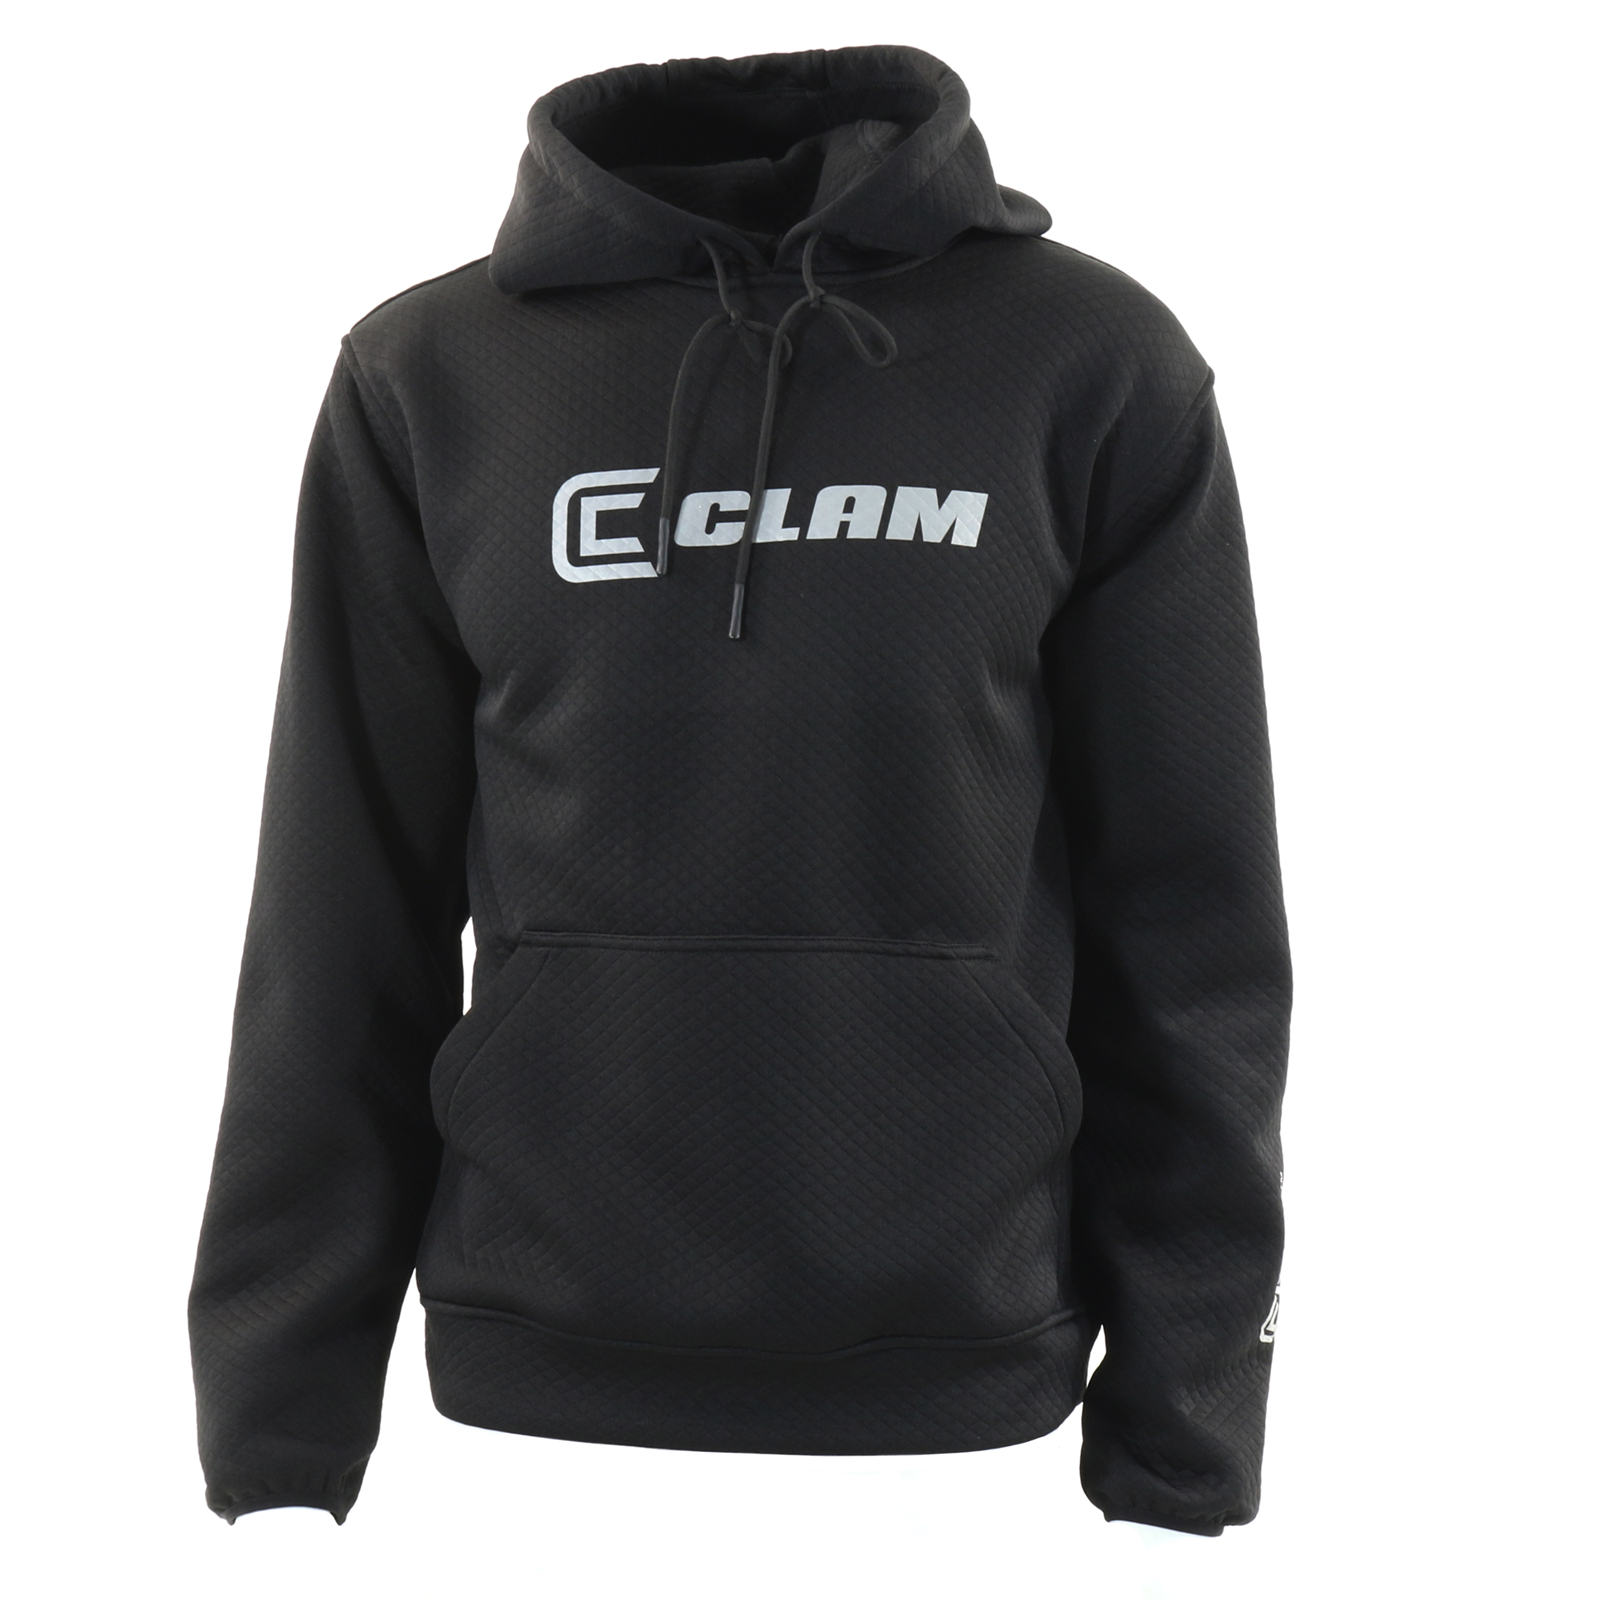 https://static.upnorthsports.com/Image/catimages/16212-16217_Clam-Command-Hoodie_1-1600.png